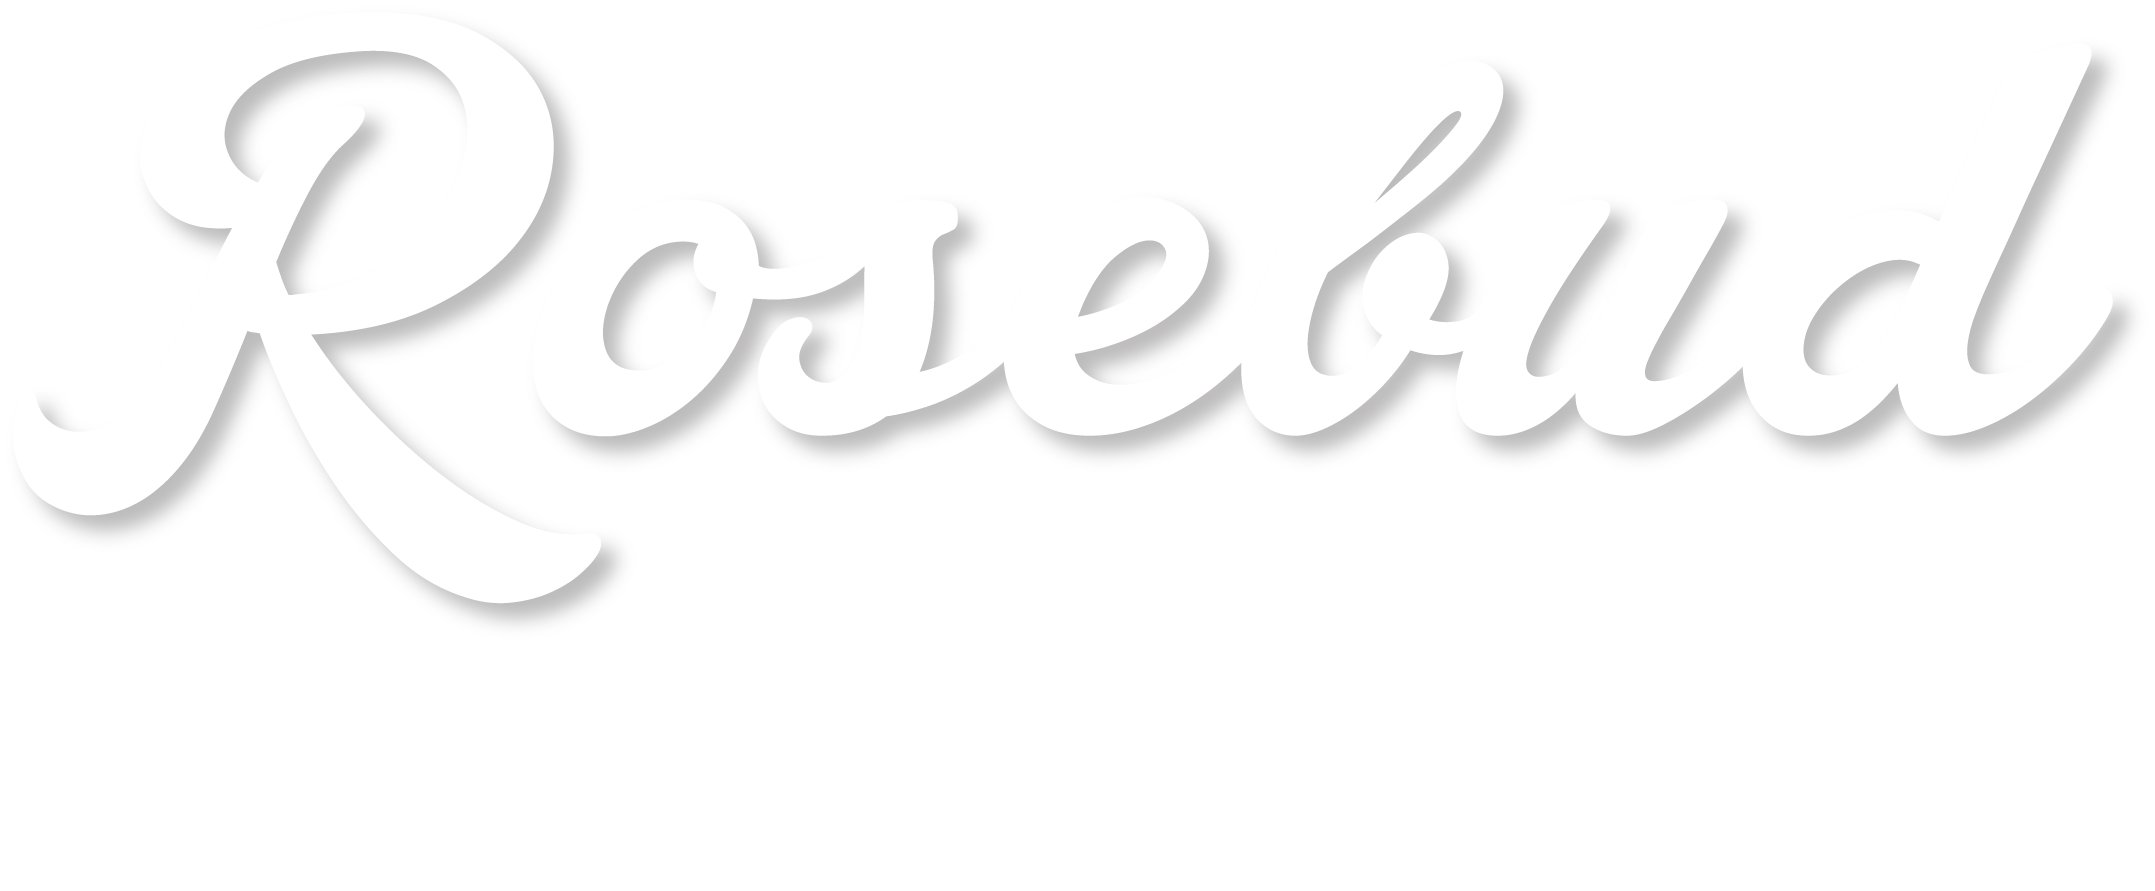 Rosebud American Kitchen and Bar - A Little Bit About a Lot of